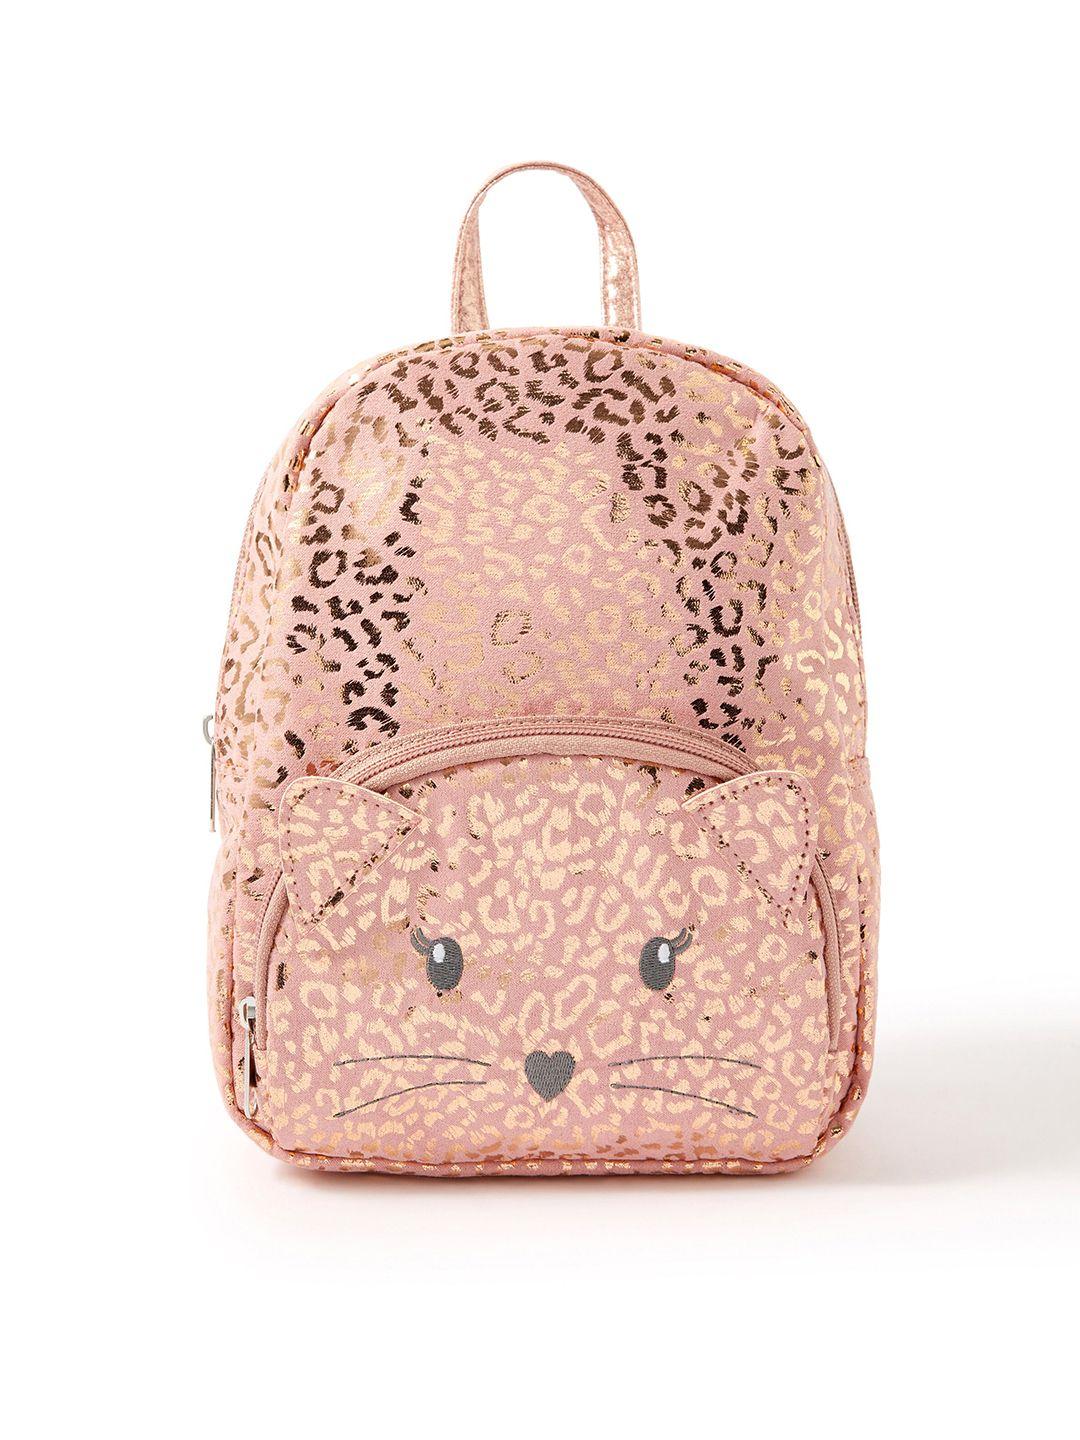 accessorize girls pink printed backpacks